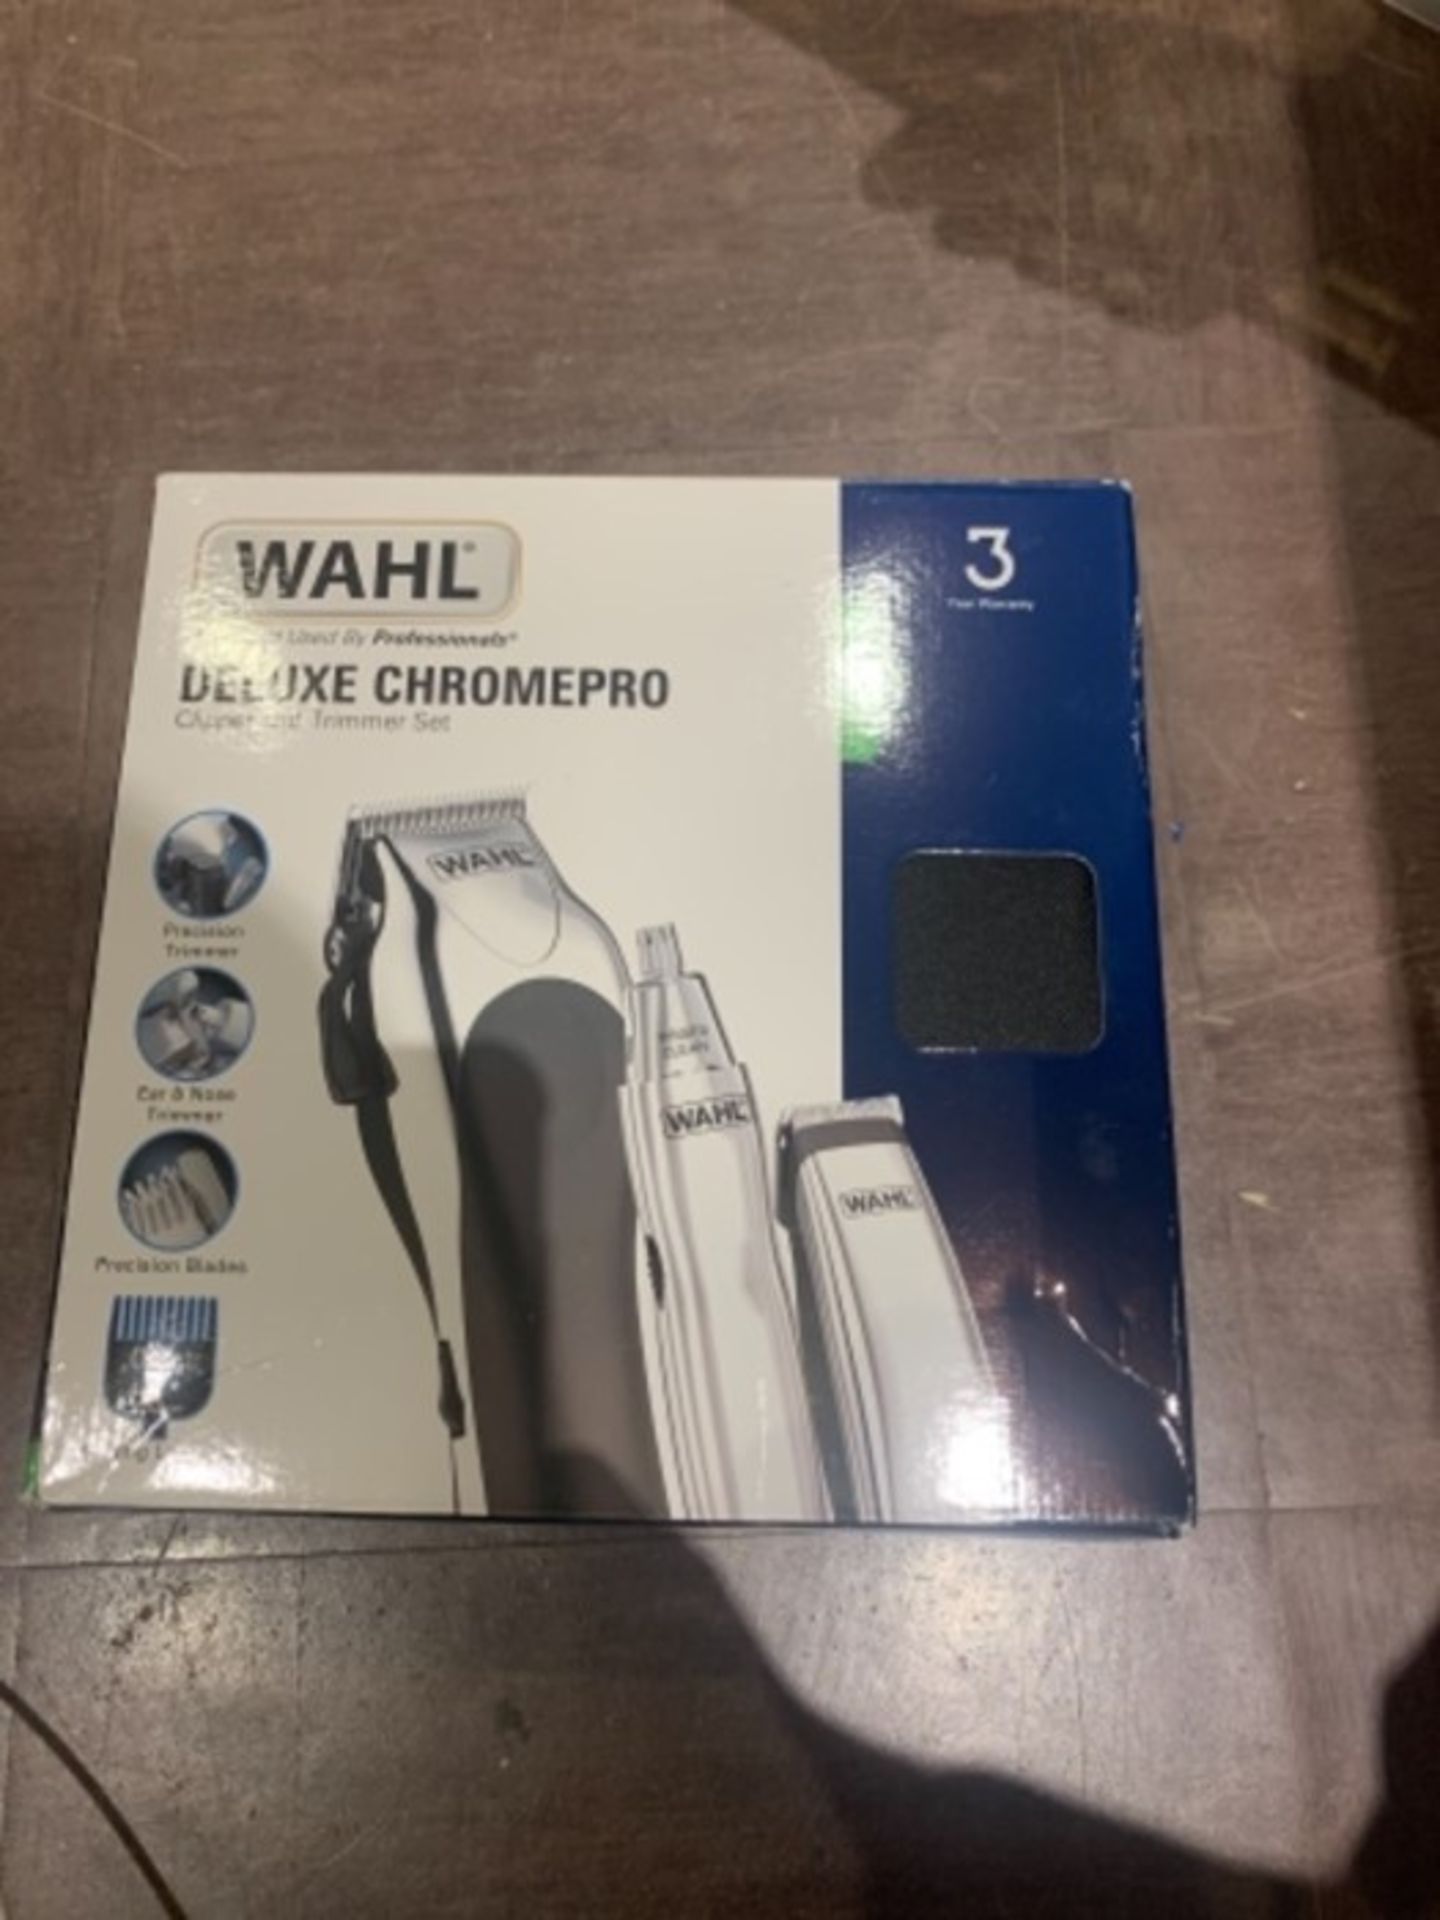 Wahl Hair Clippers for Men, 3-in-1 Chrome Pro Deluxe Head Shaver Men's Hair Clippers, - Image 2 of 3